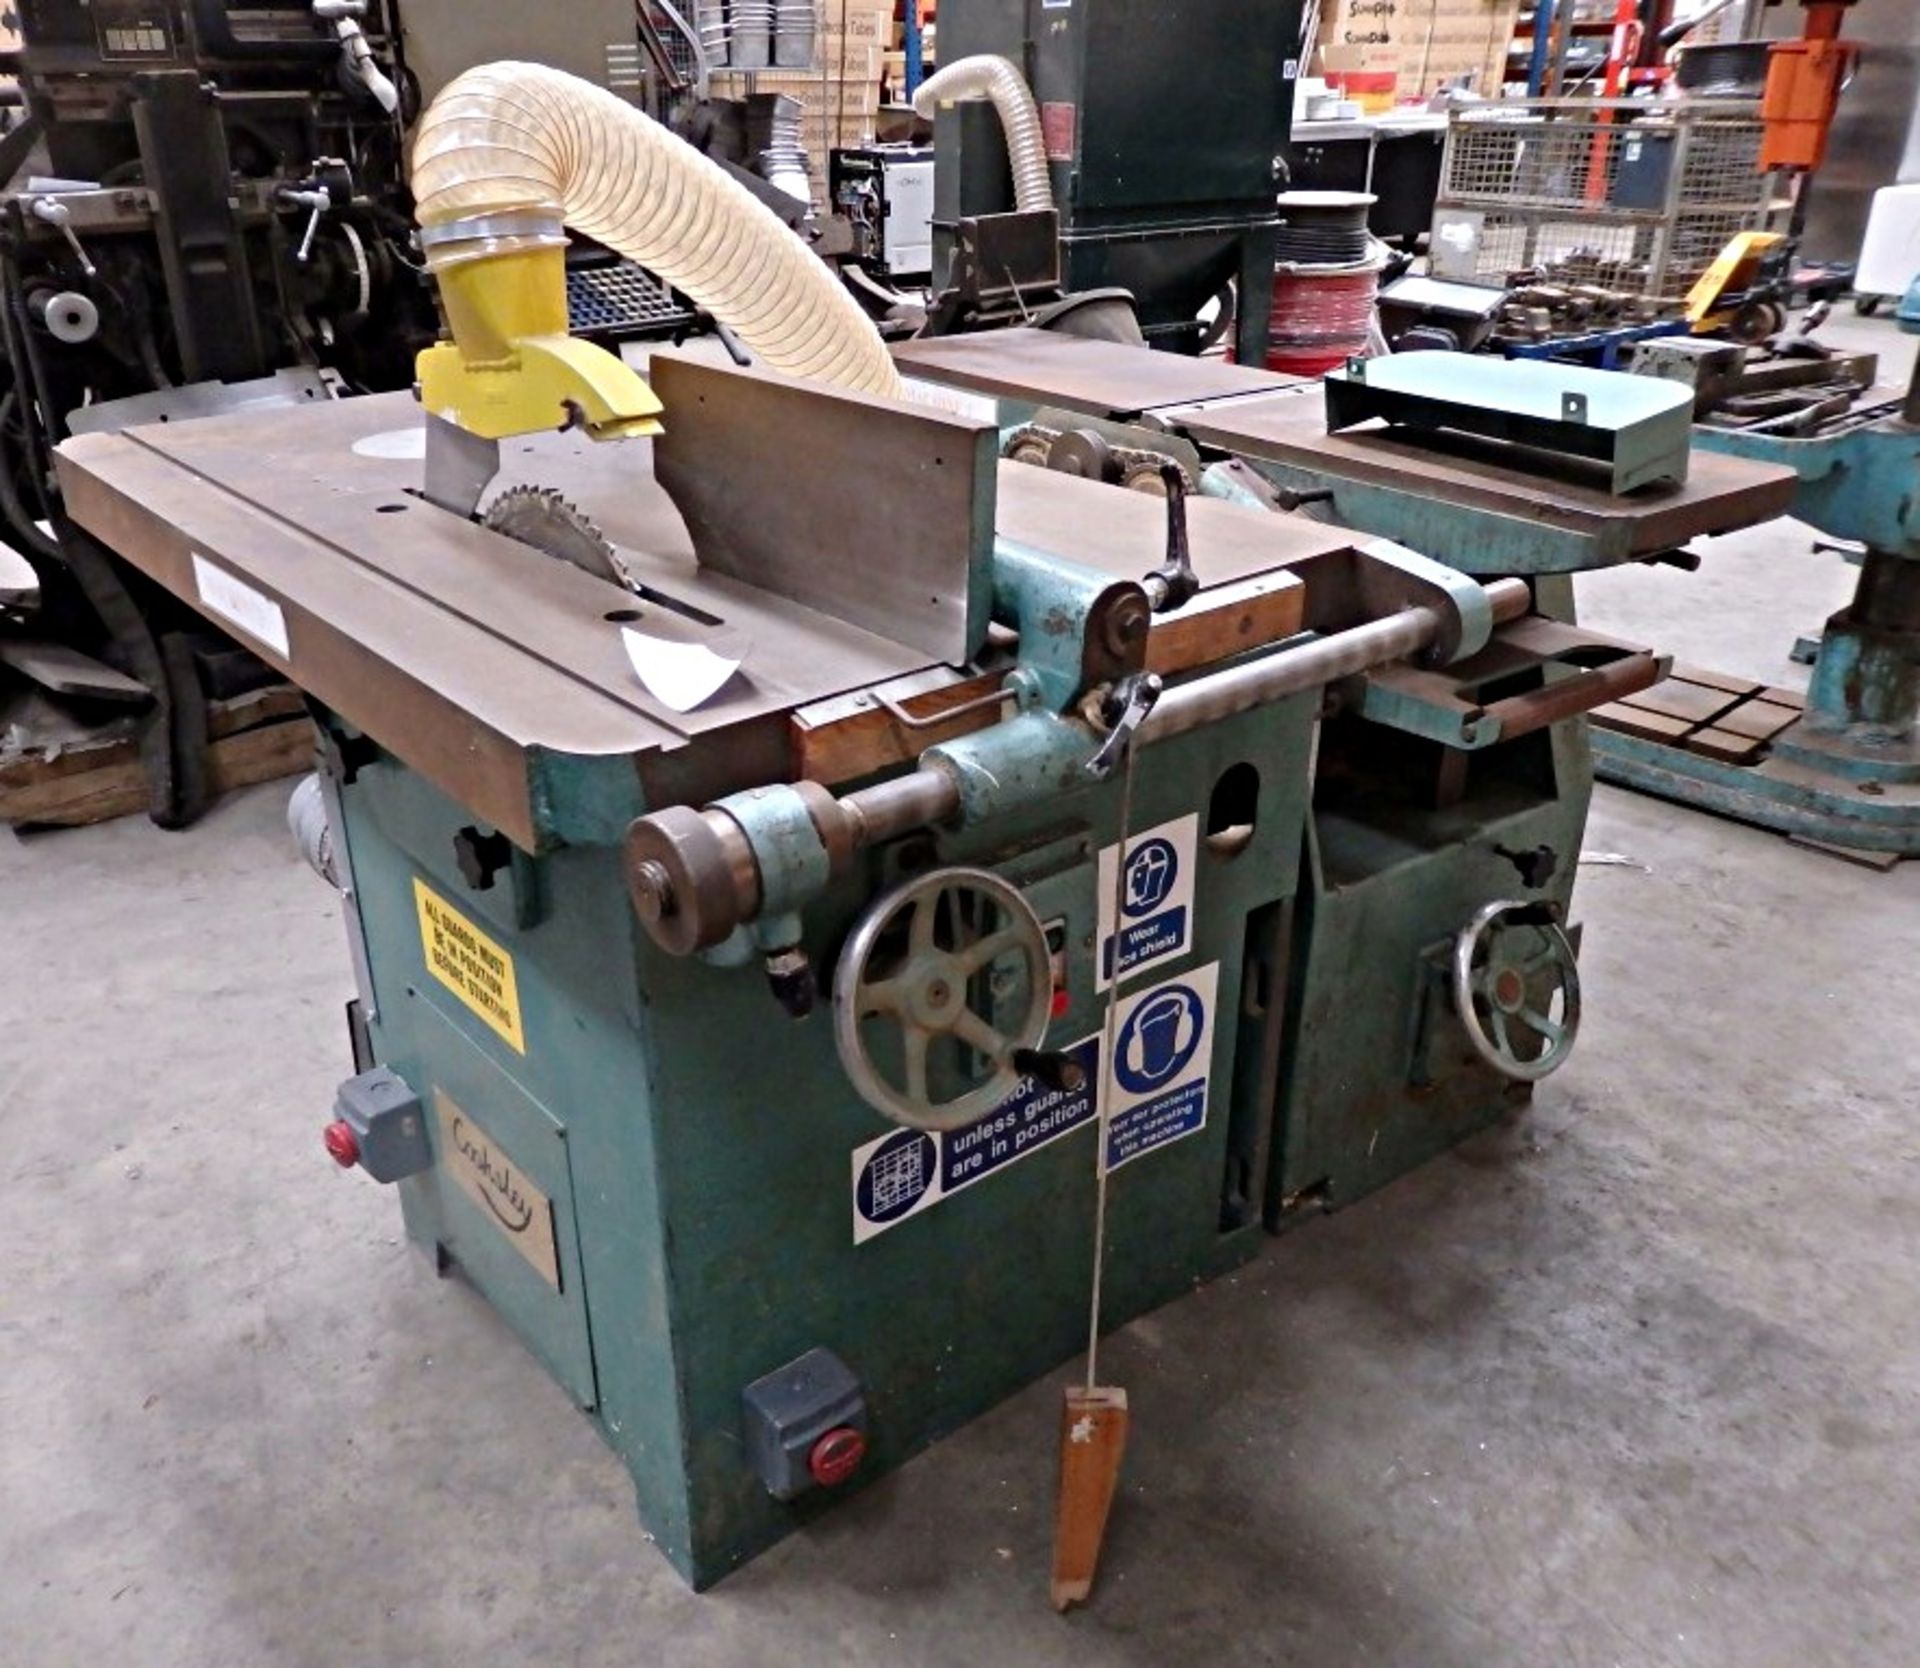 1 x COOKSLEY HEAVY DUTY UNIVERSAL MACHINE,(12"X9" PLANER THICKNESSER & 16" SAW COMBINATION) - Ref